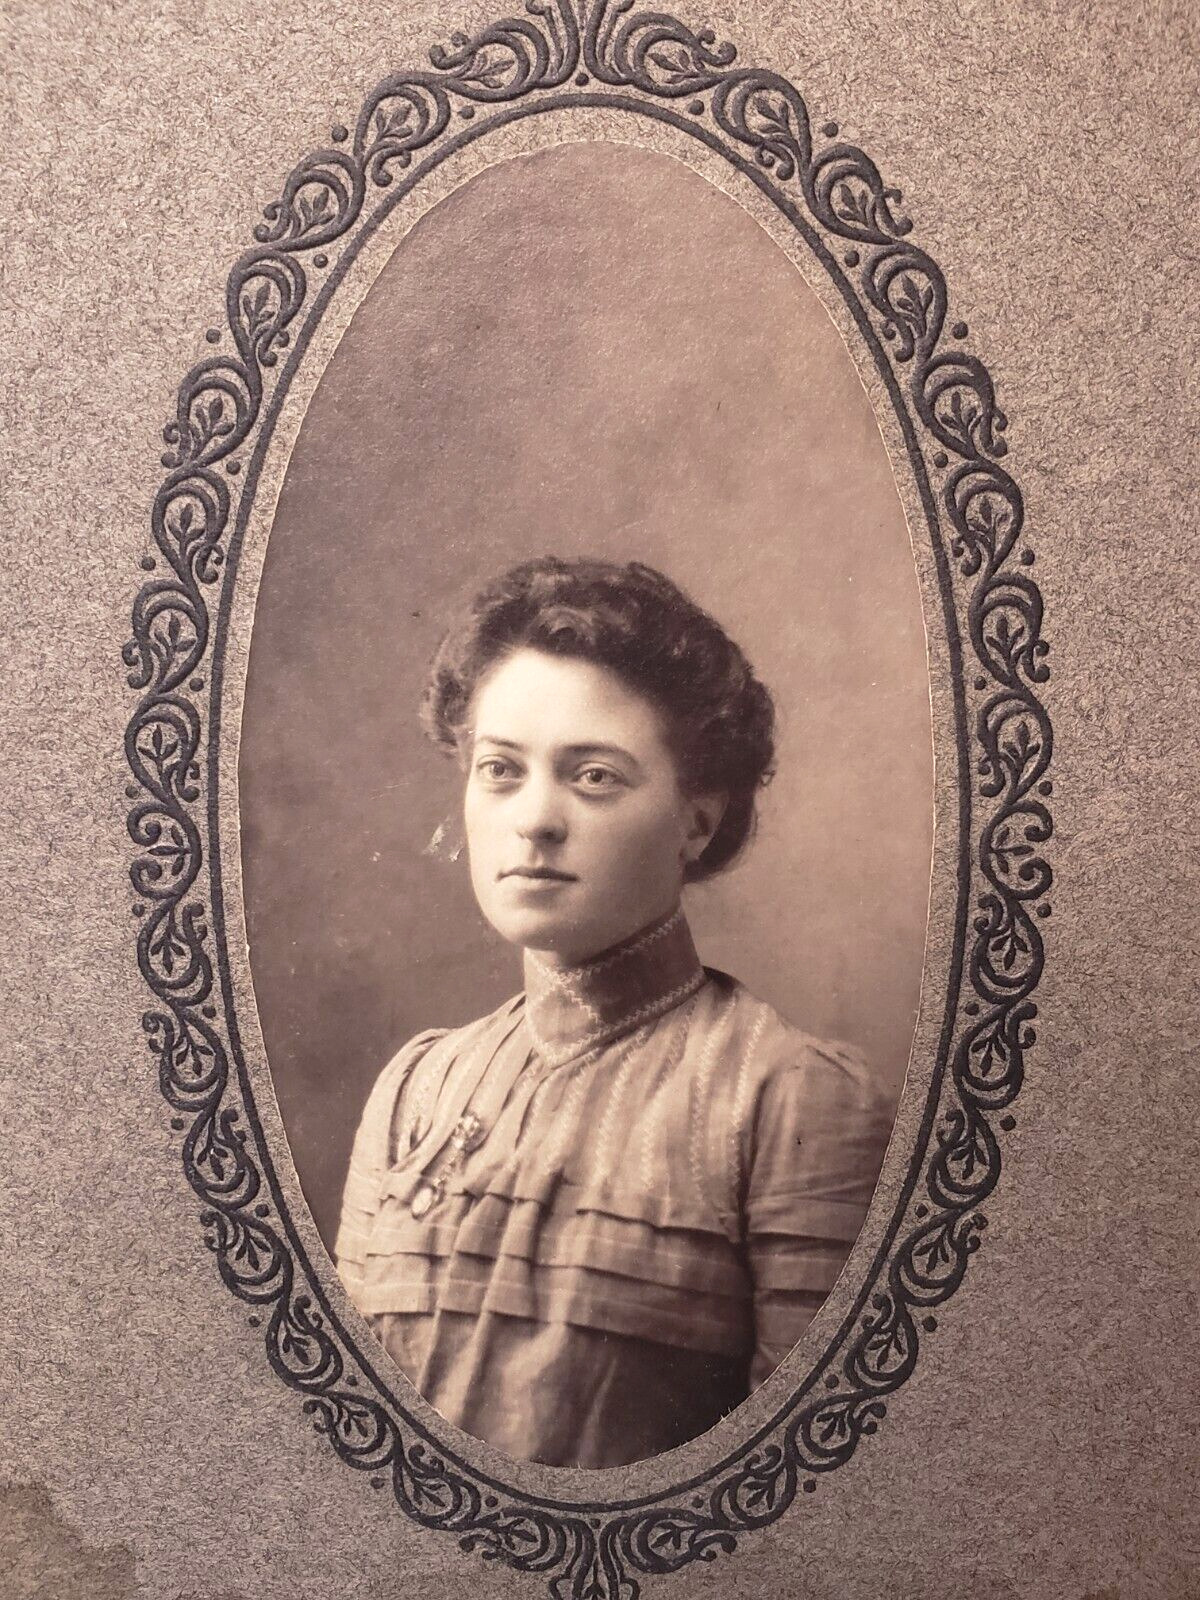 Antique Cabinet Card | Lovely Young Woman Short Hair in Period Dress